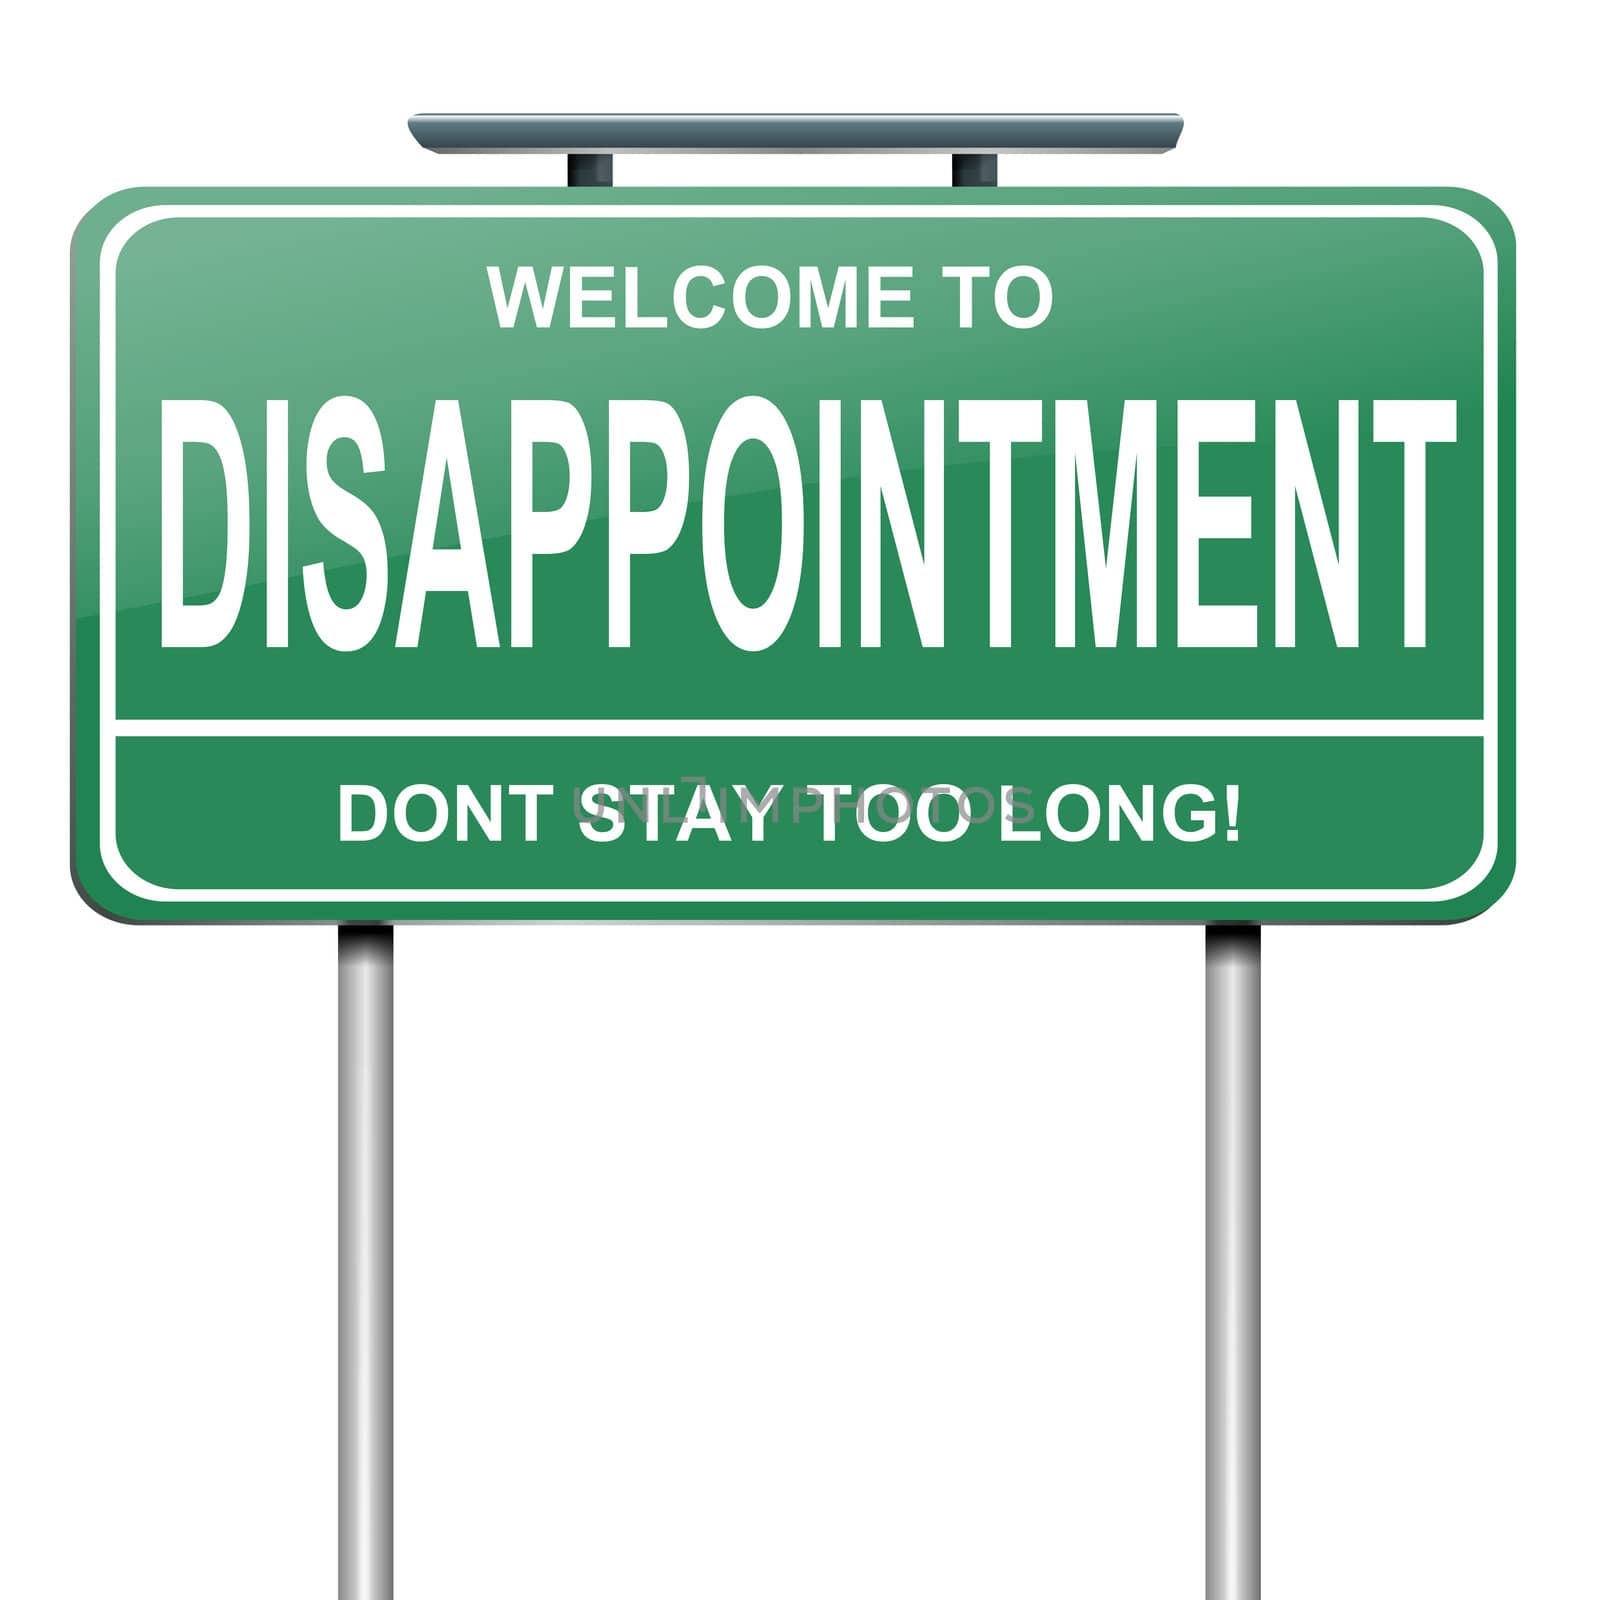 Illustration depicting a green roadsign with a disappointment concept. White background.